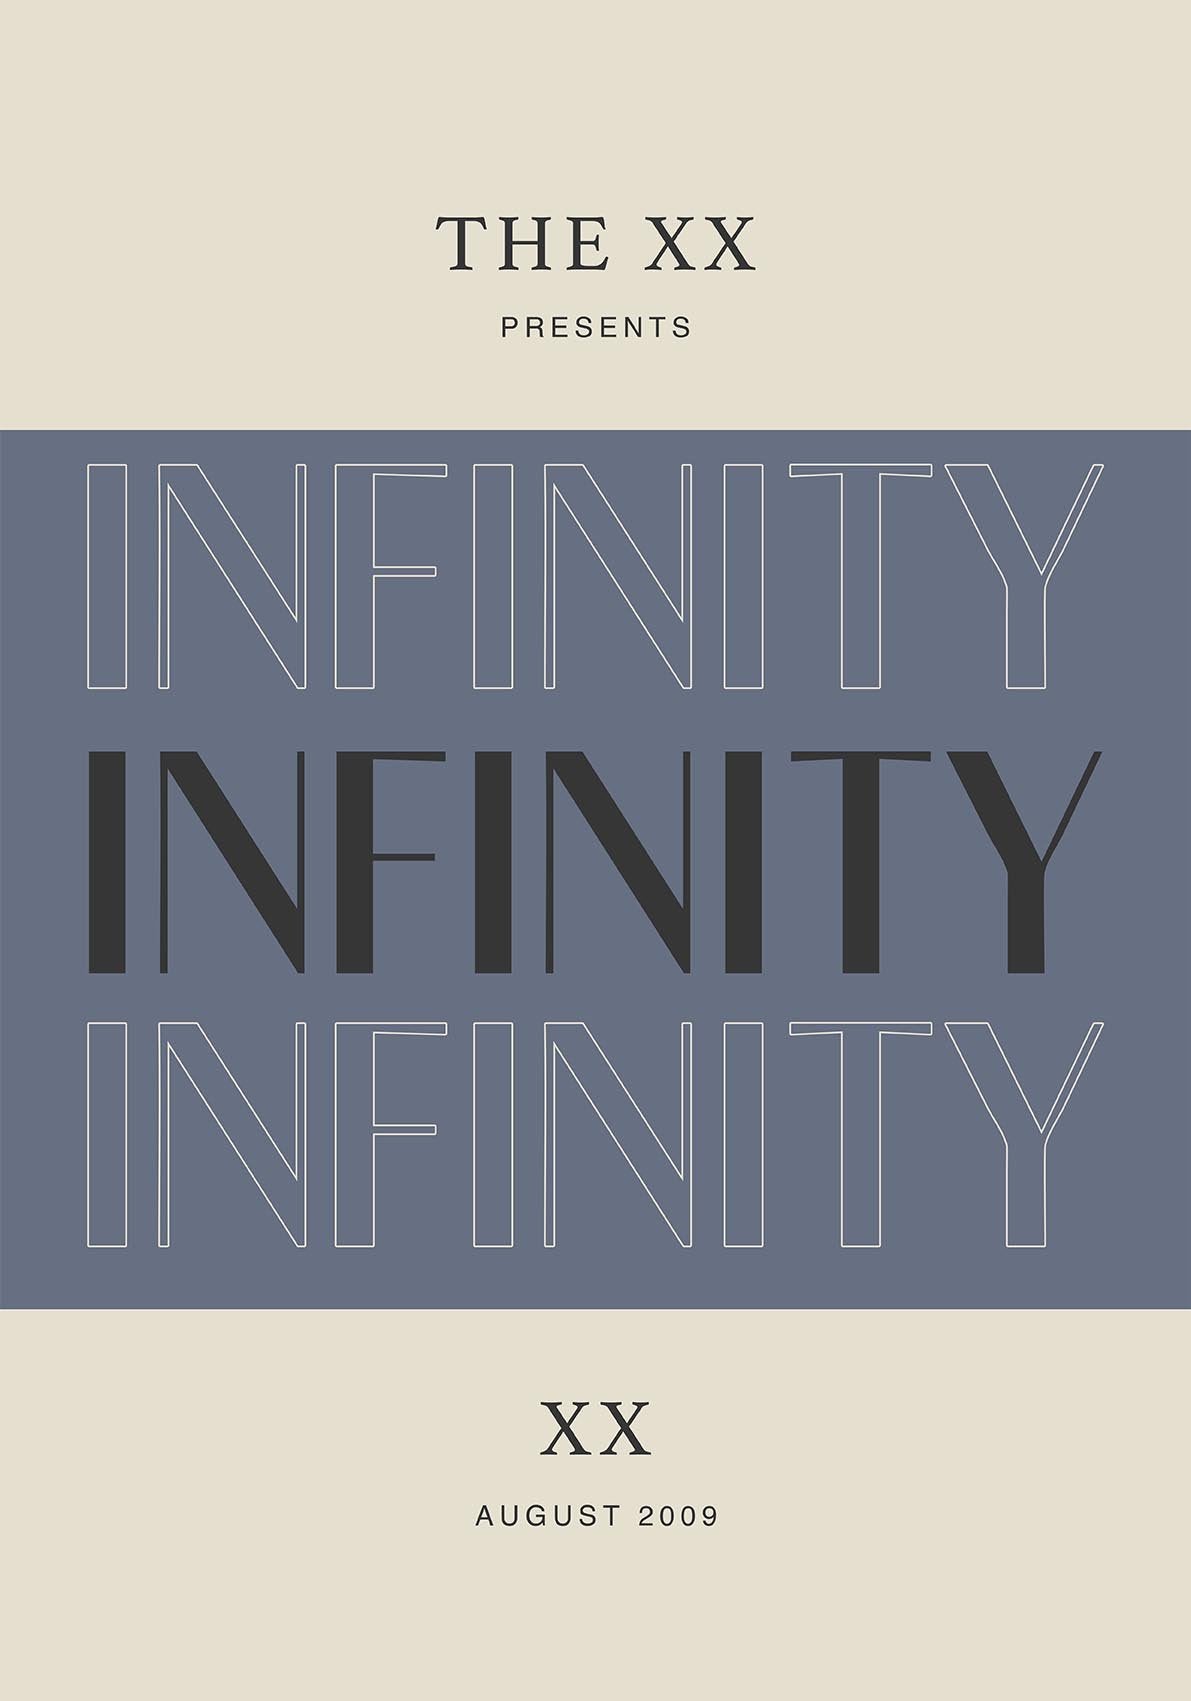 Infinity by the XX